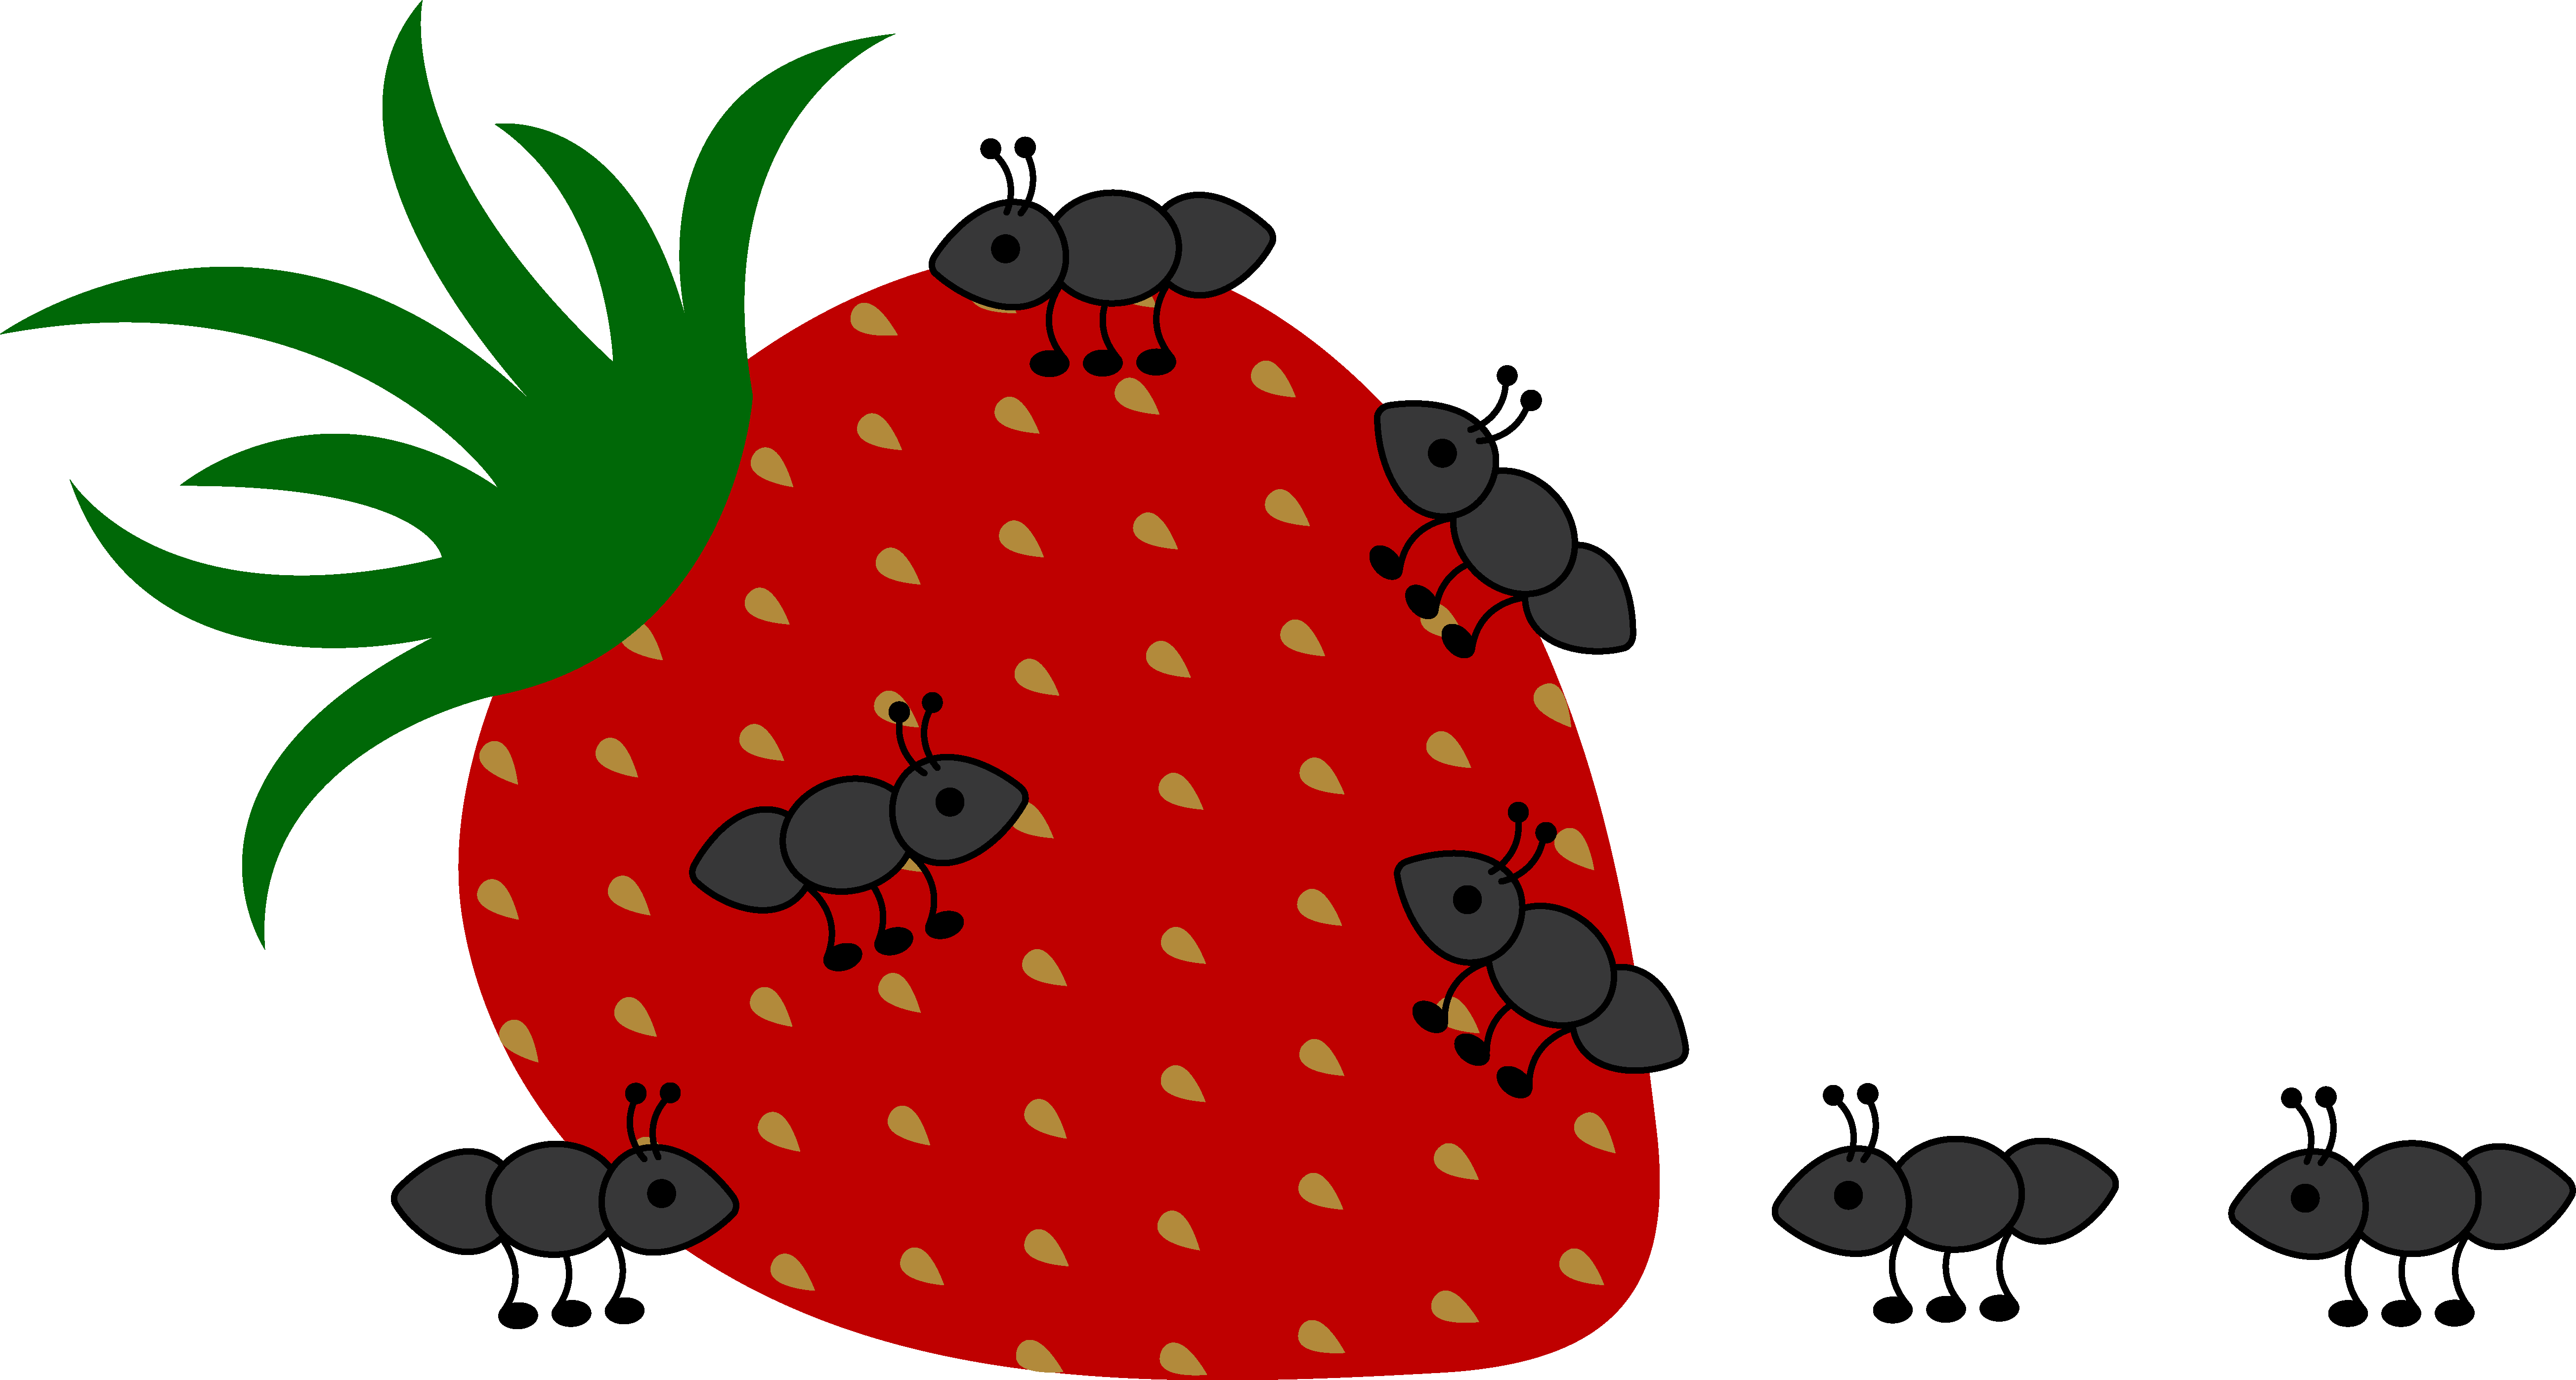 Ants Crawling on Strawberry - Free Clip Art